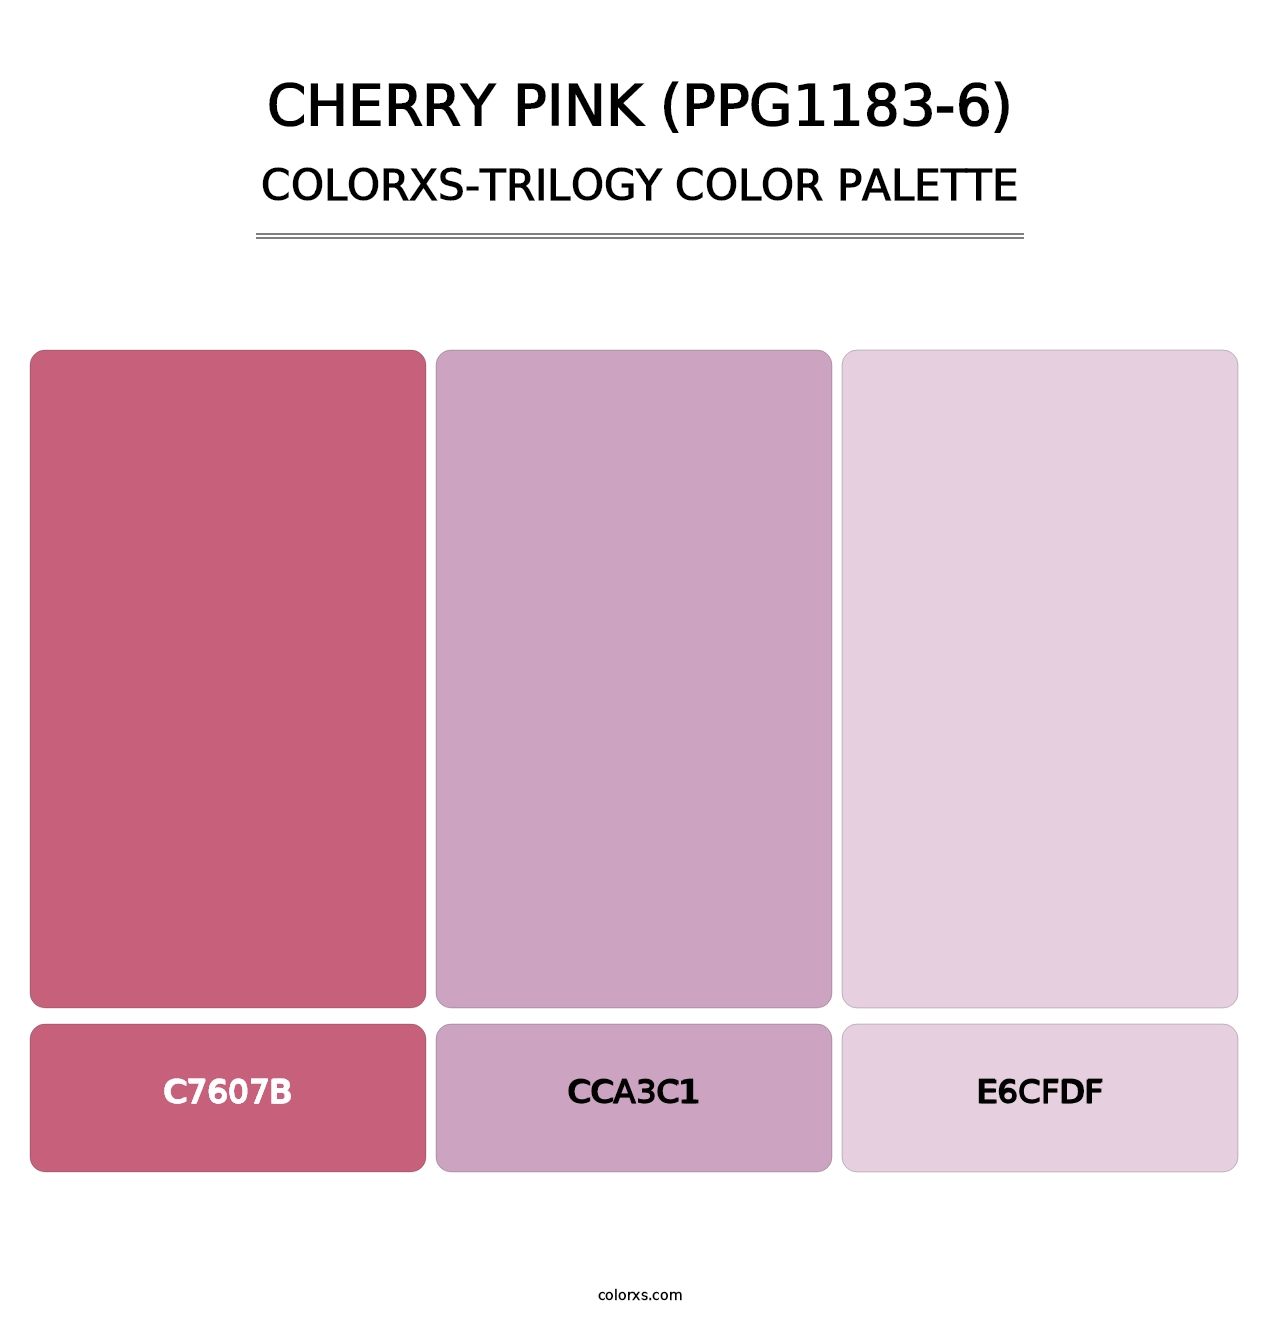 Cherry Pink (PPG1183-6) - Colorxs Trilogy Palette